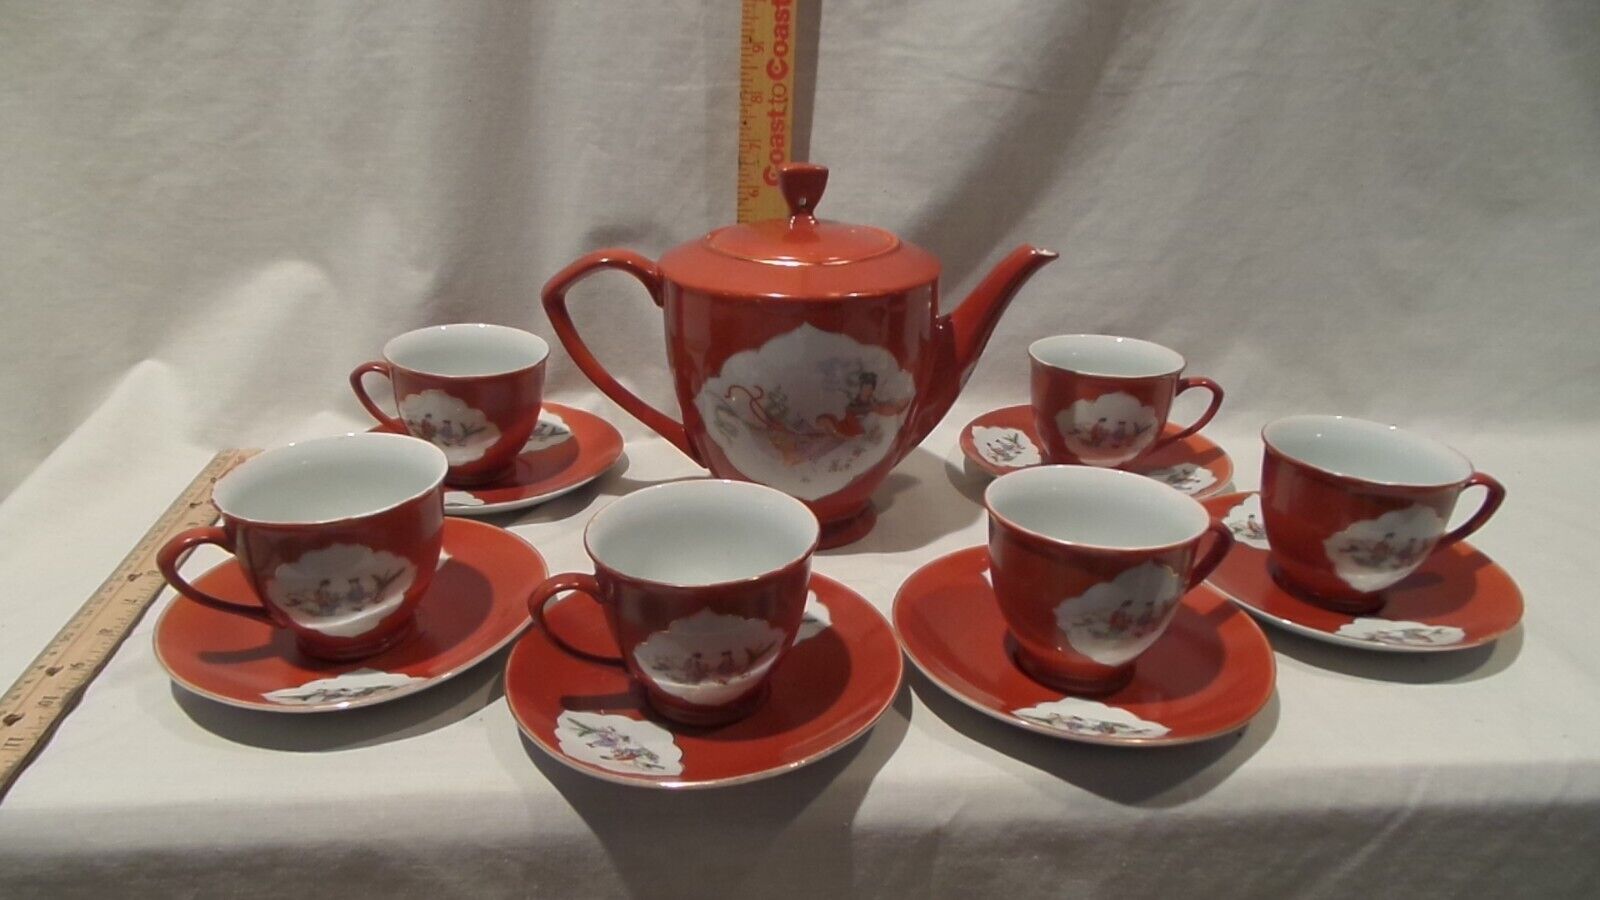 VINTAGE SET OF 14 CHINESE PORCELAIN TEAPOT & 6 CUPS / SAUCERS-KOW LOON(HONG KONG